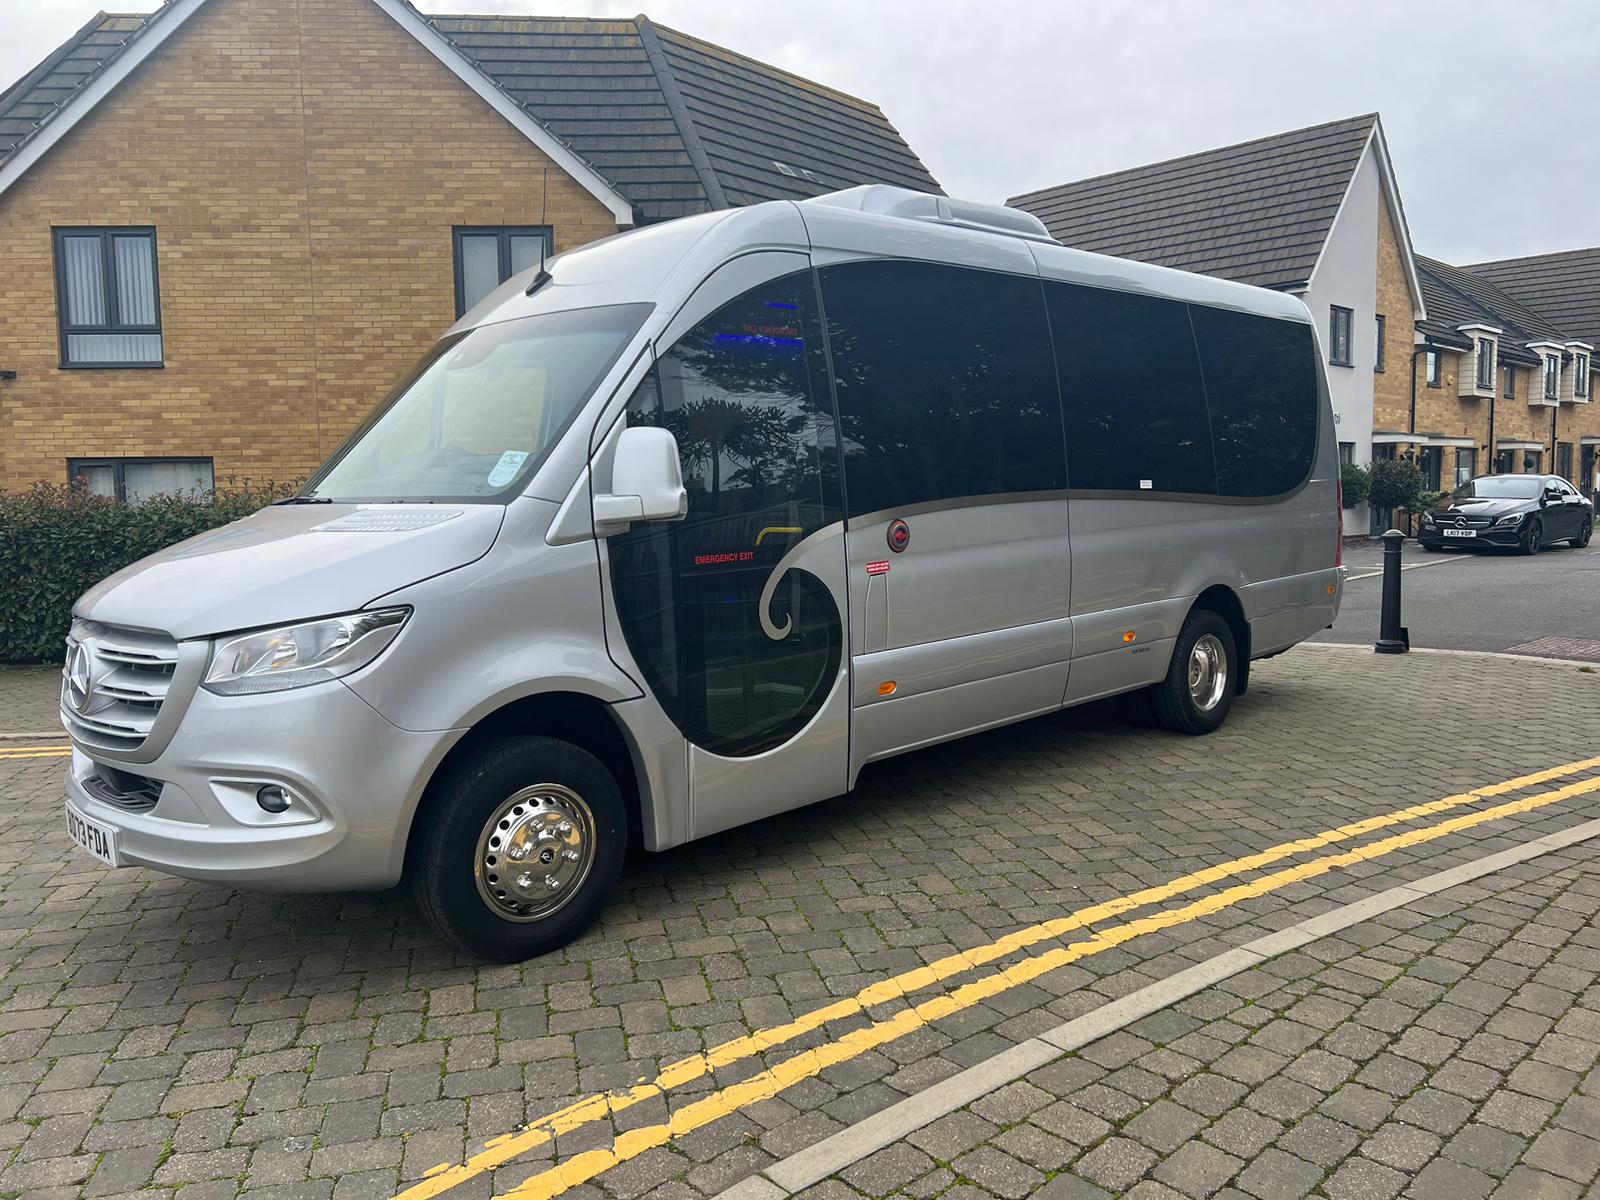 Minibus Hire for the Carabao Cup Final in Wembley by CoachScanner: Chelsea vs Liverpool